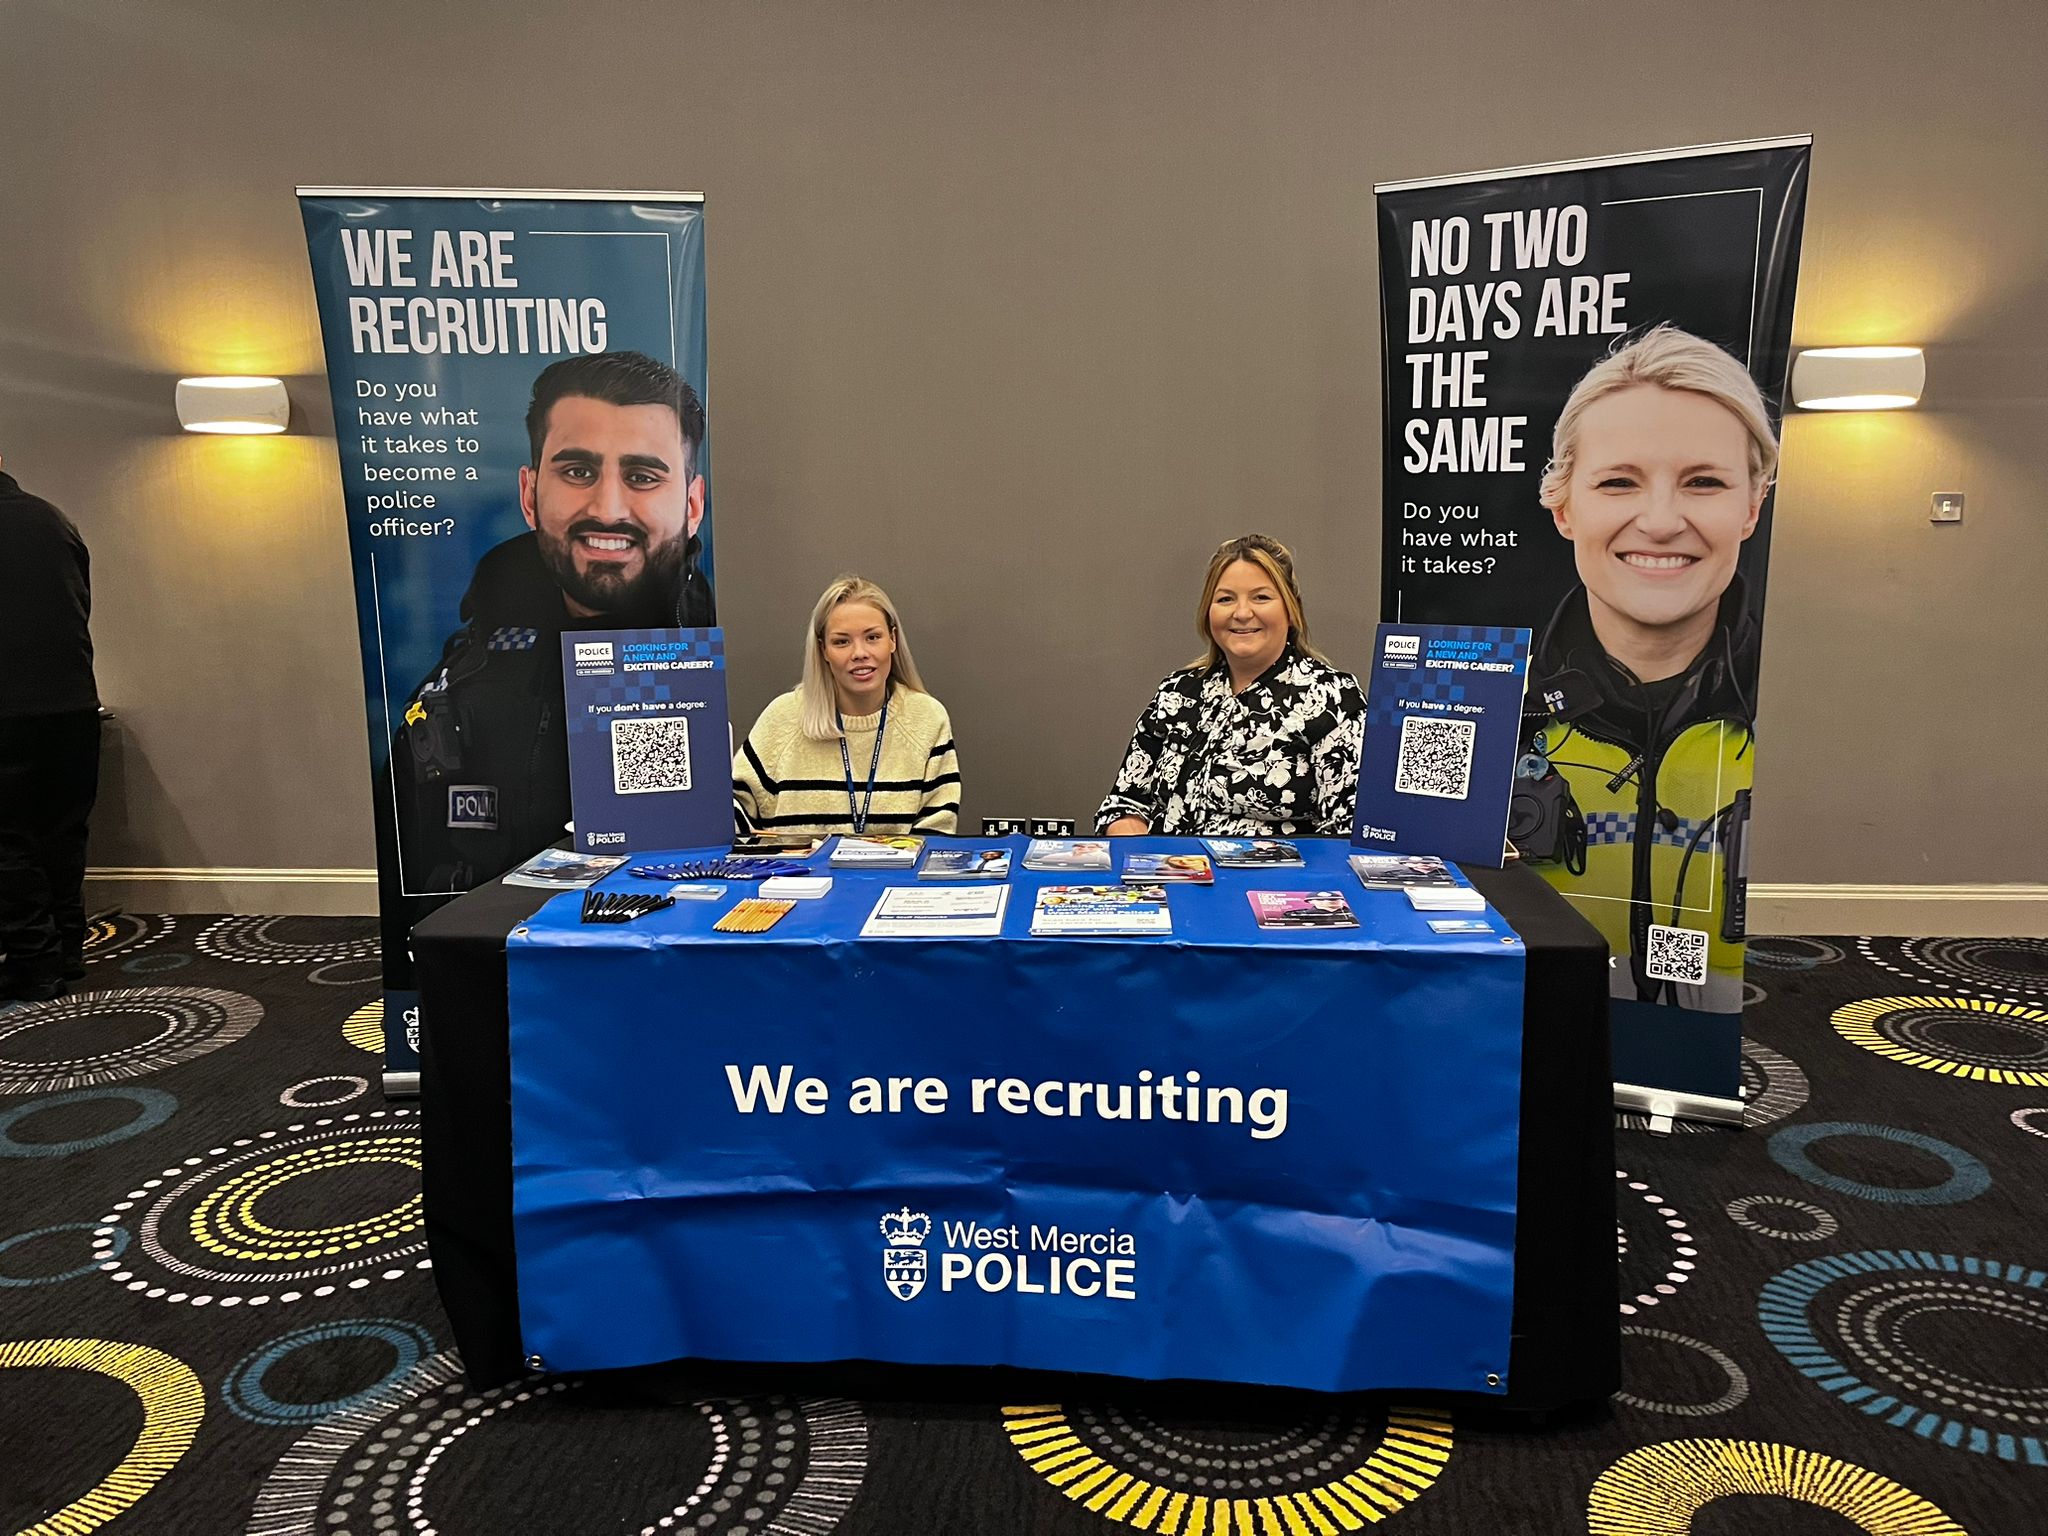 West Mercia Police at our event in Telford & Shrewsbury